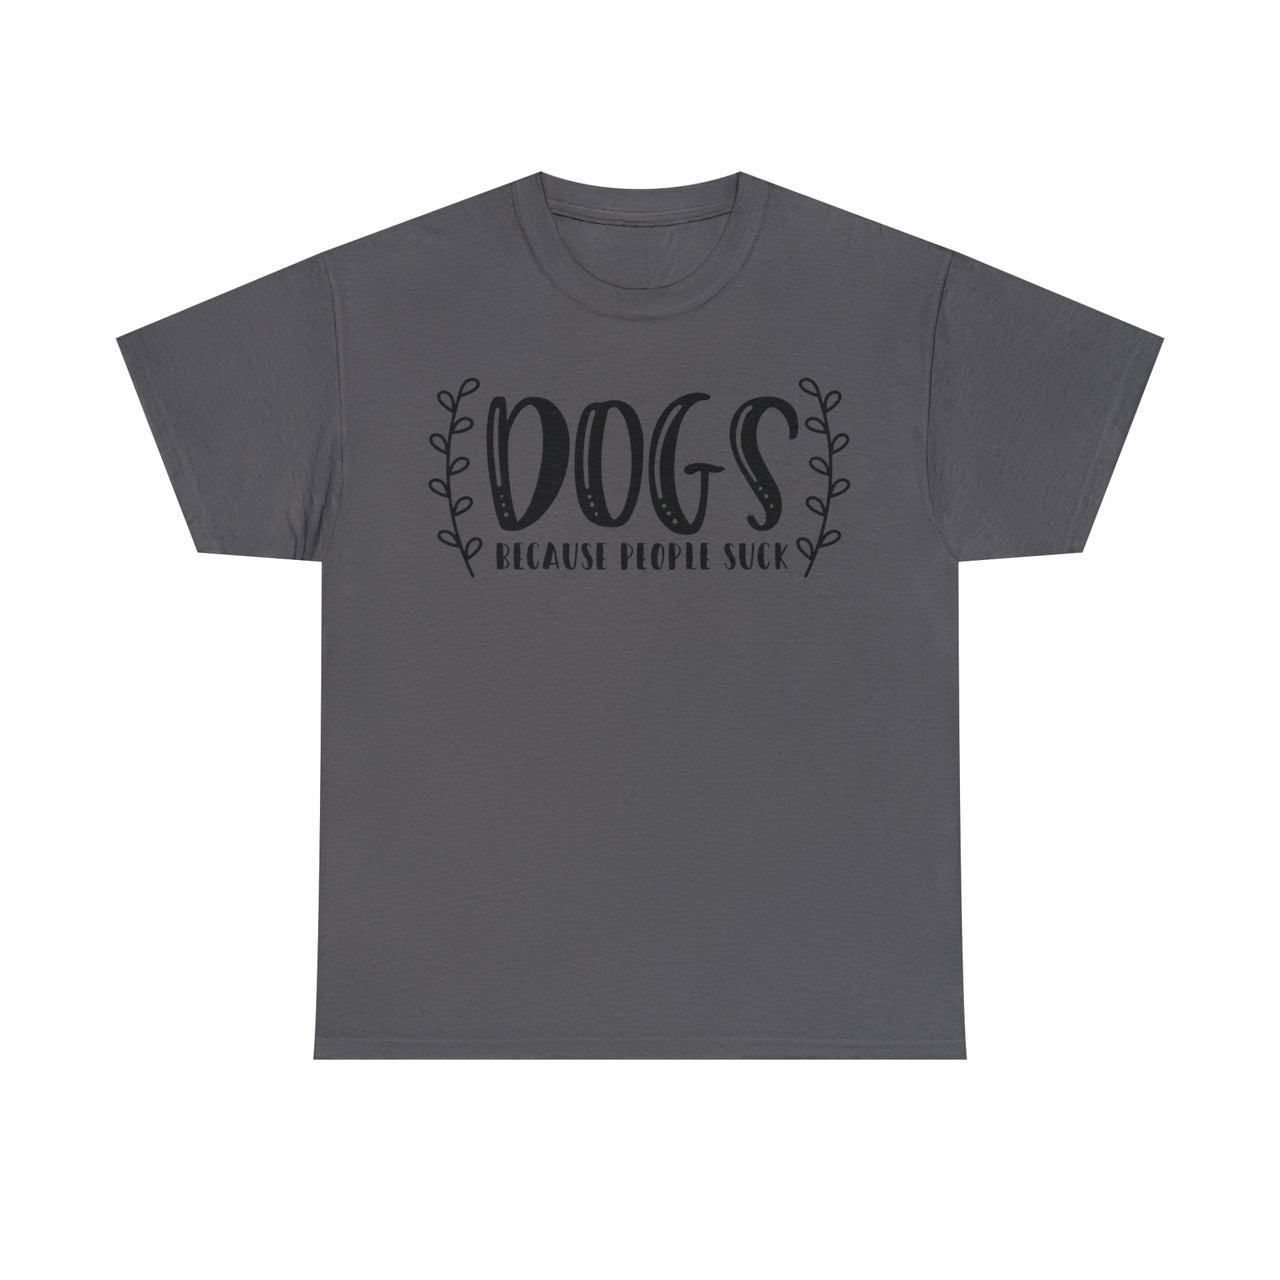 Dogs Because People Suck 🐕 Unisex T-Shirt